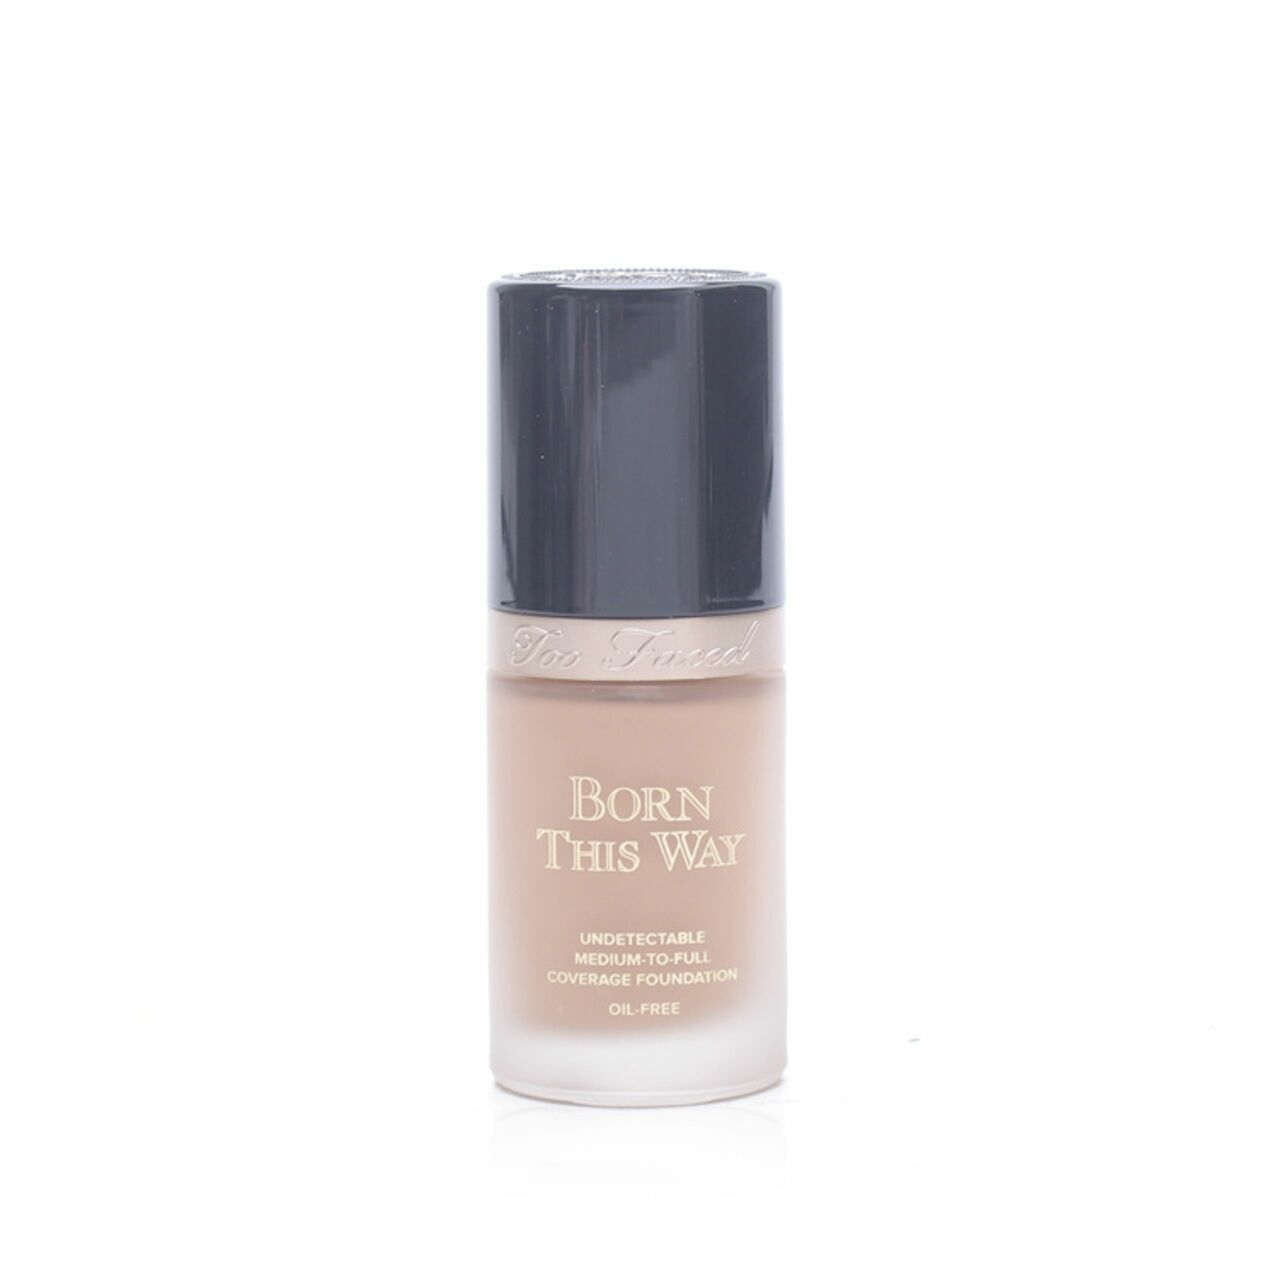 Too Faced Born This Way Oil-Free Undetectable Medium To Full Coverage Foundation